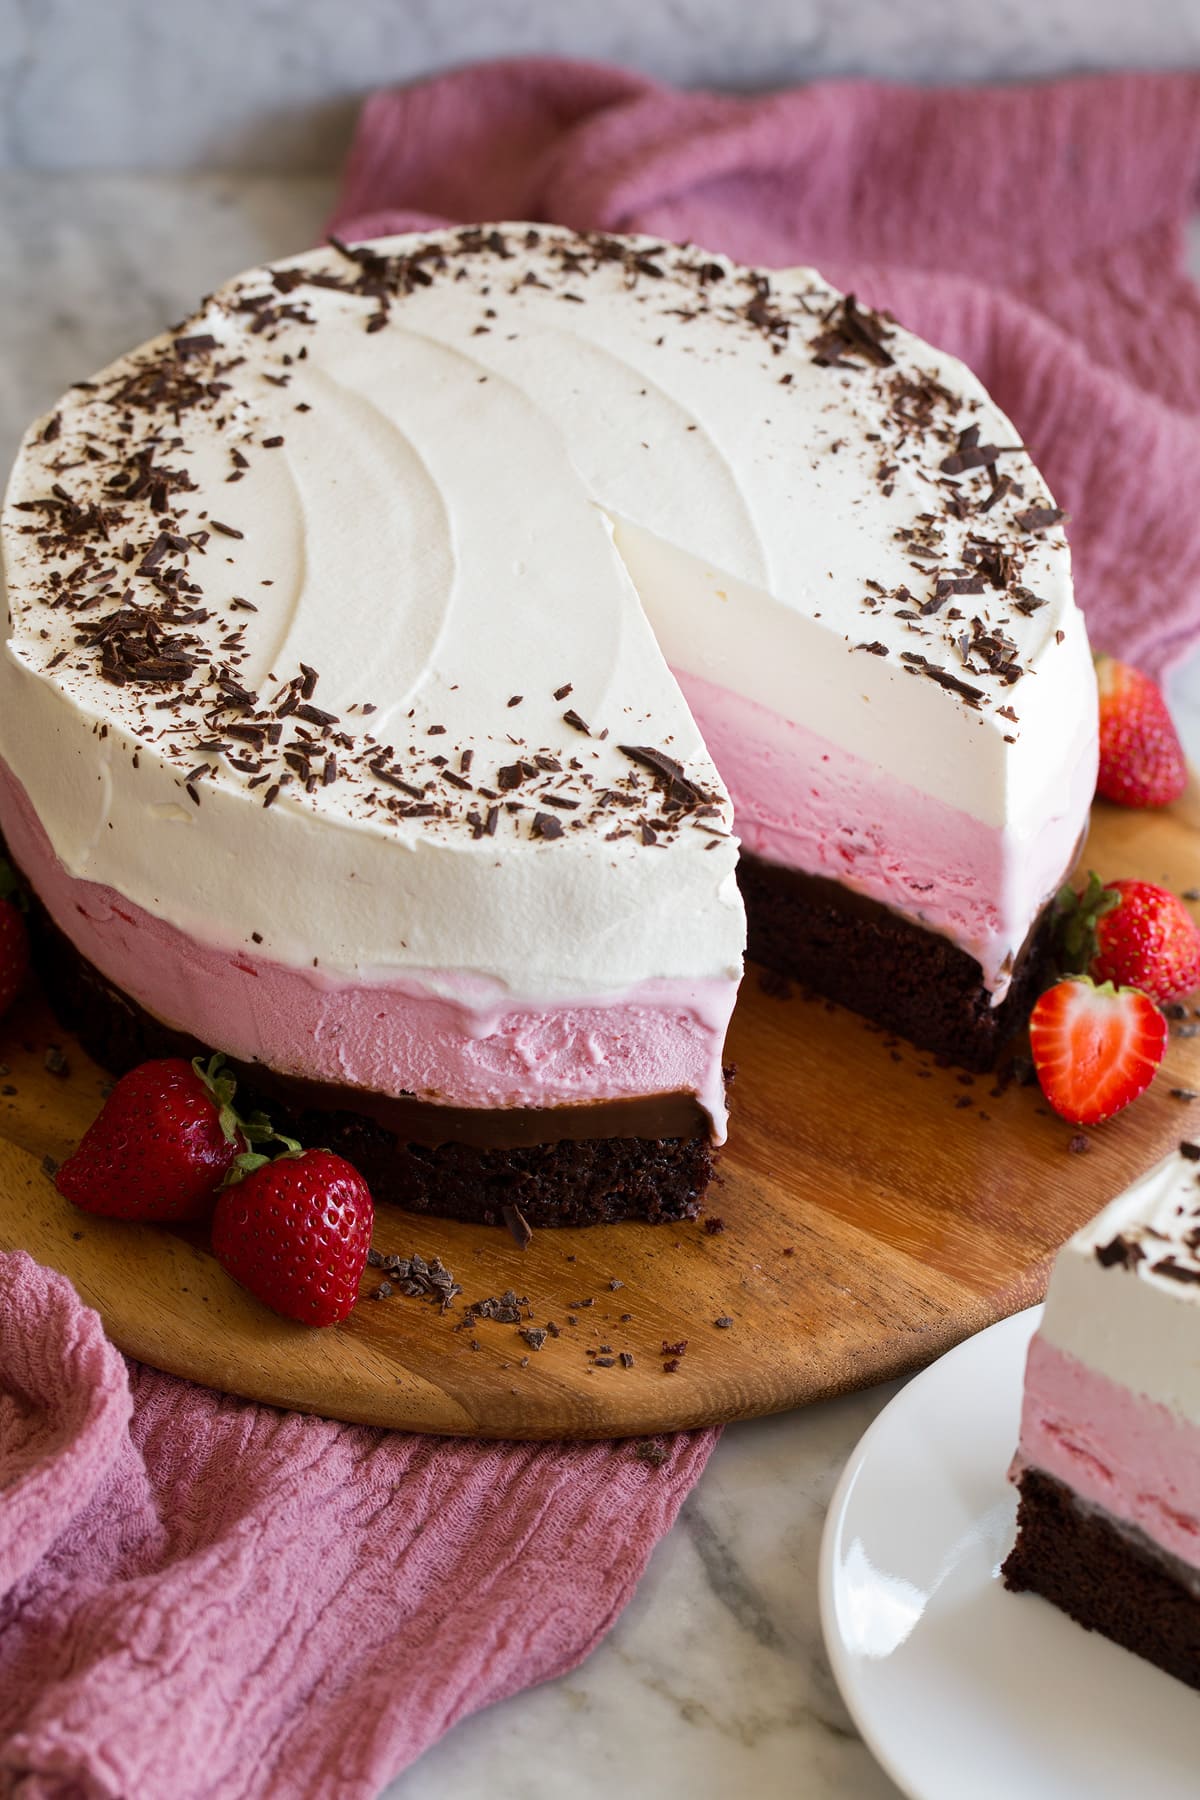 Whole ice cream cake with one slice removed. Layered with chocolate, strawberry, and vanilla.